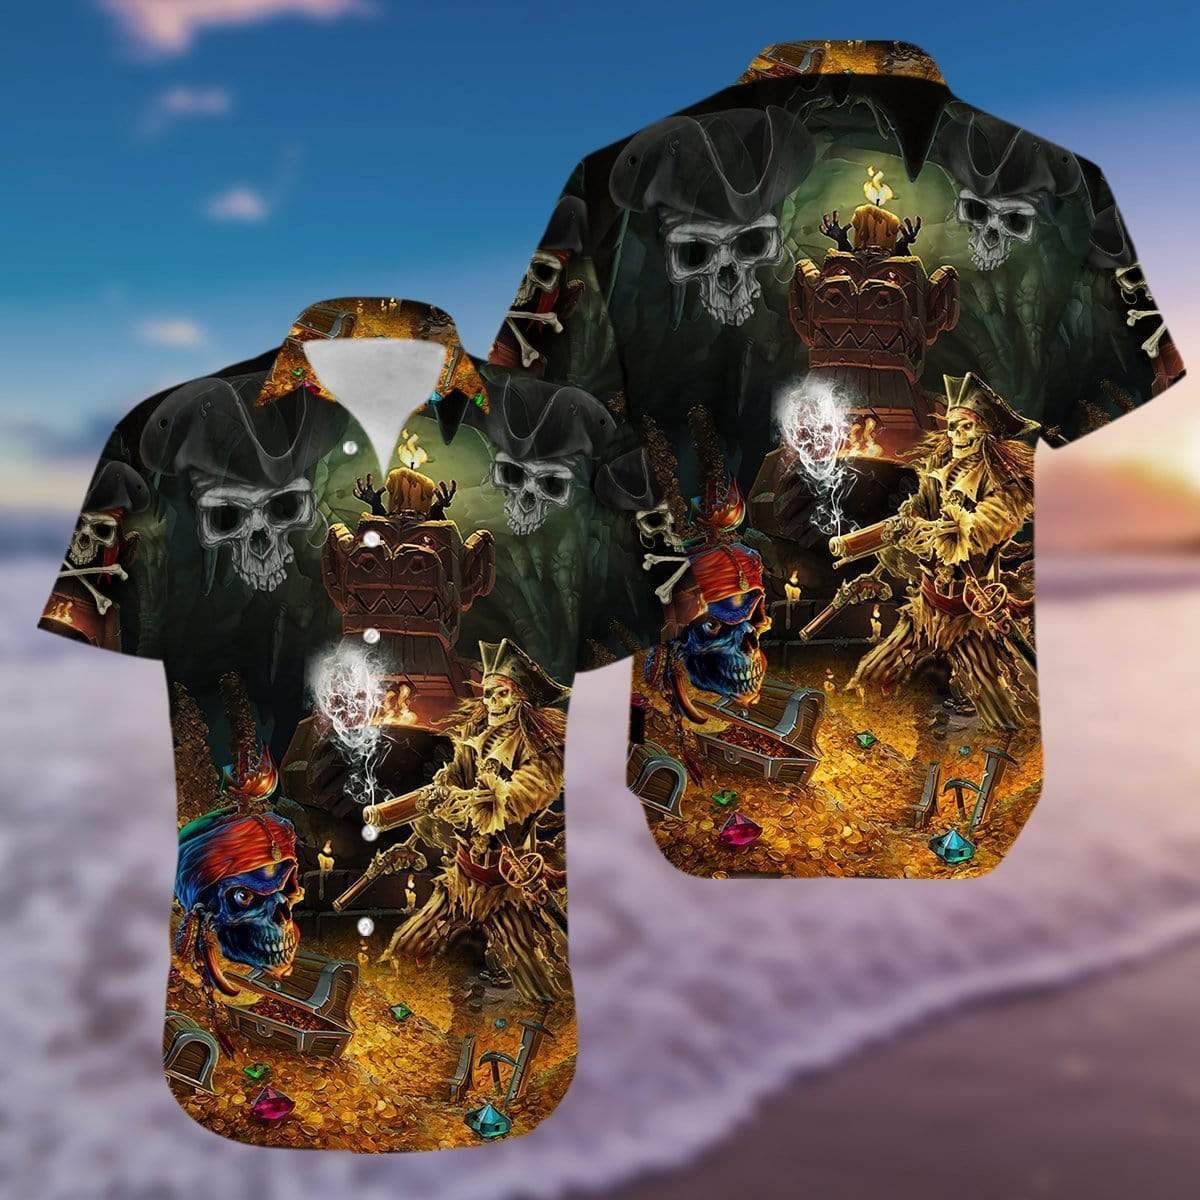 Check Out This Awesome Amazing Pirate Skull Finding Treasure Hawaiian Shirt